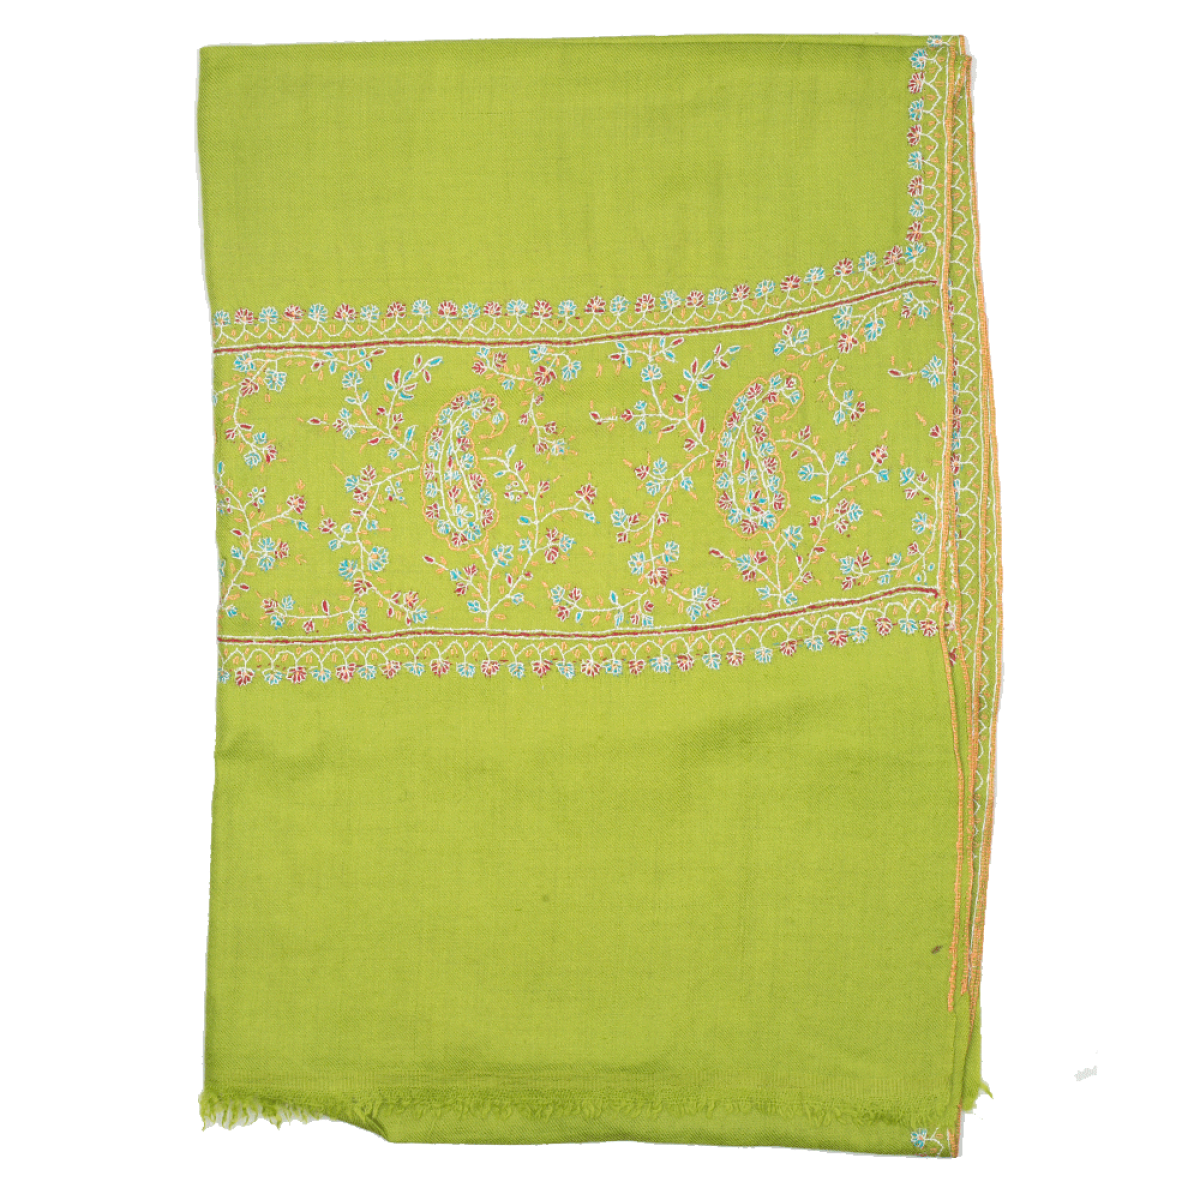 Embroidered Pashmina Stole - Lime Green & Blue